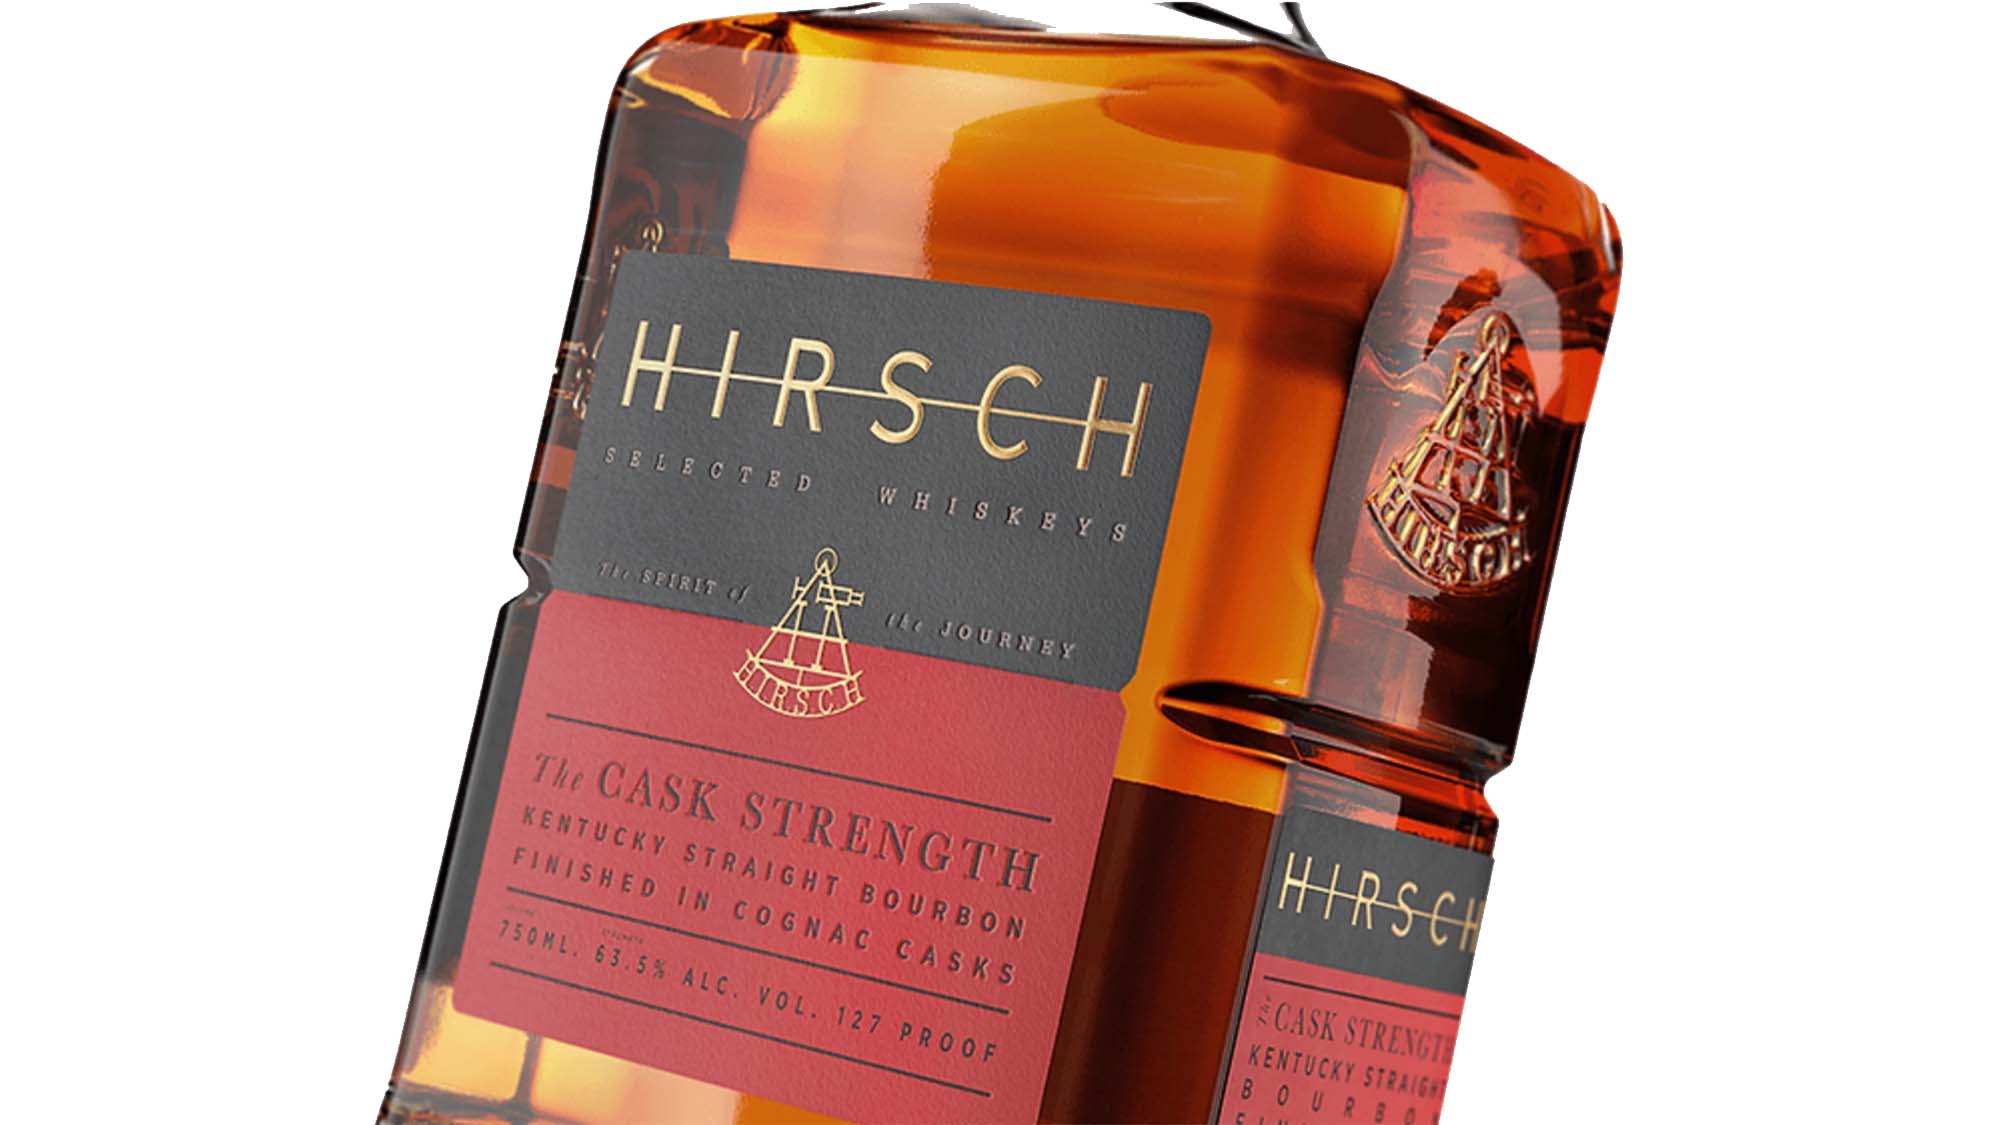 Hirsch And Hine Team Up To Finish Cask Strength Whiskey In Cognac Barrels